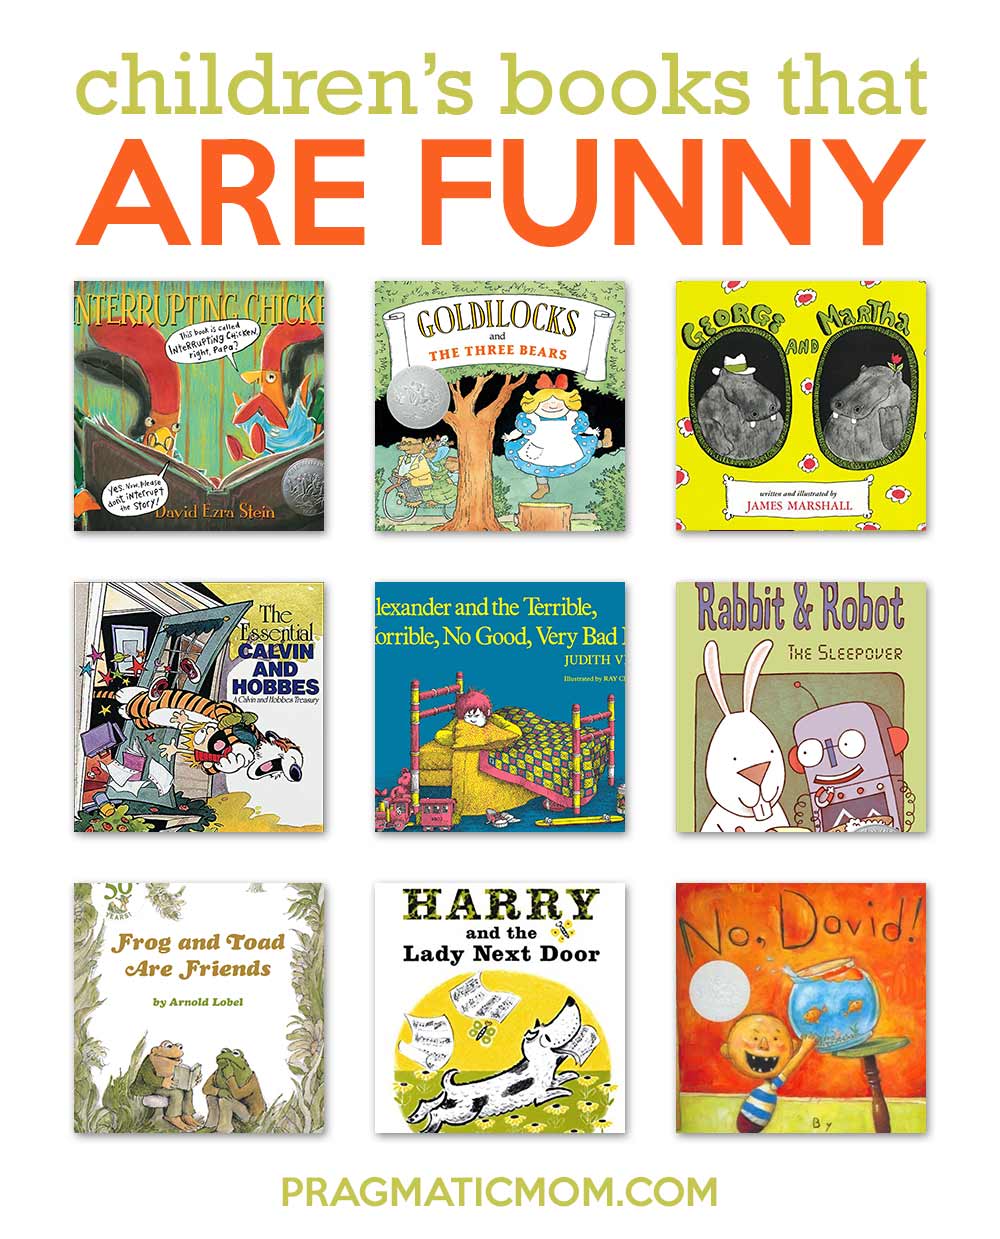 Funny Picture Books Your Child with Laugh About - Pragmatic Mom